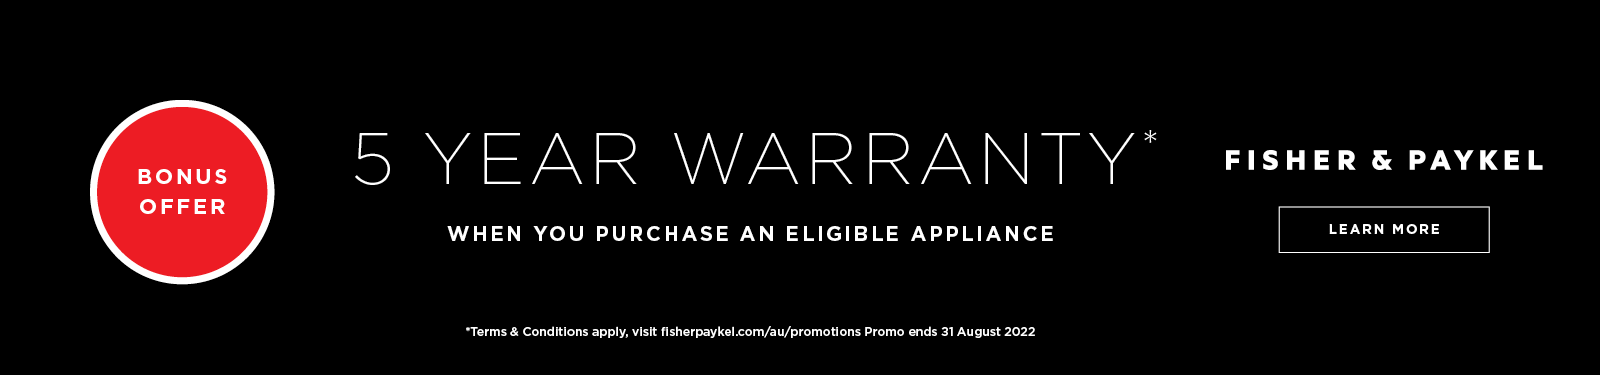 5 Year Warranty on selected Fisher & Paykel Appliances